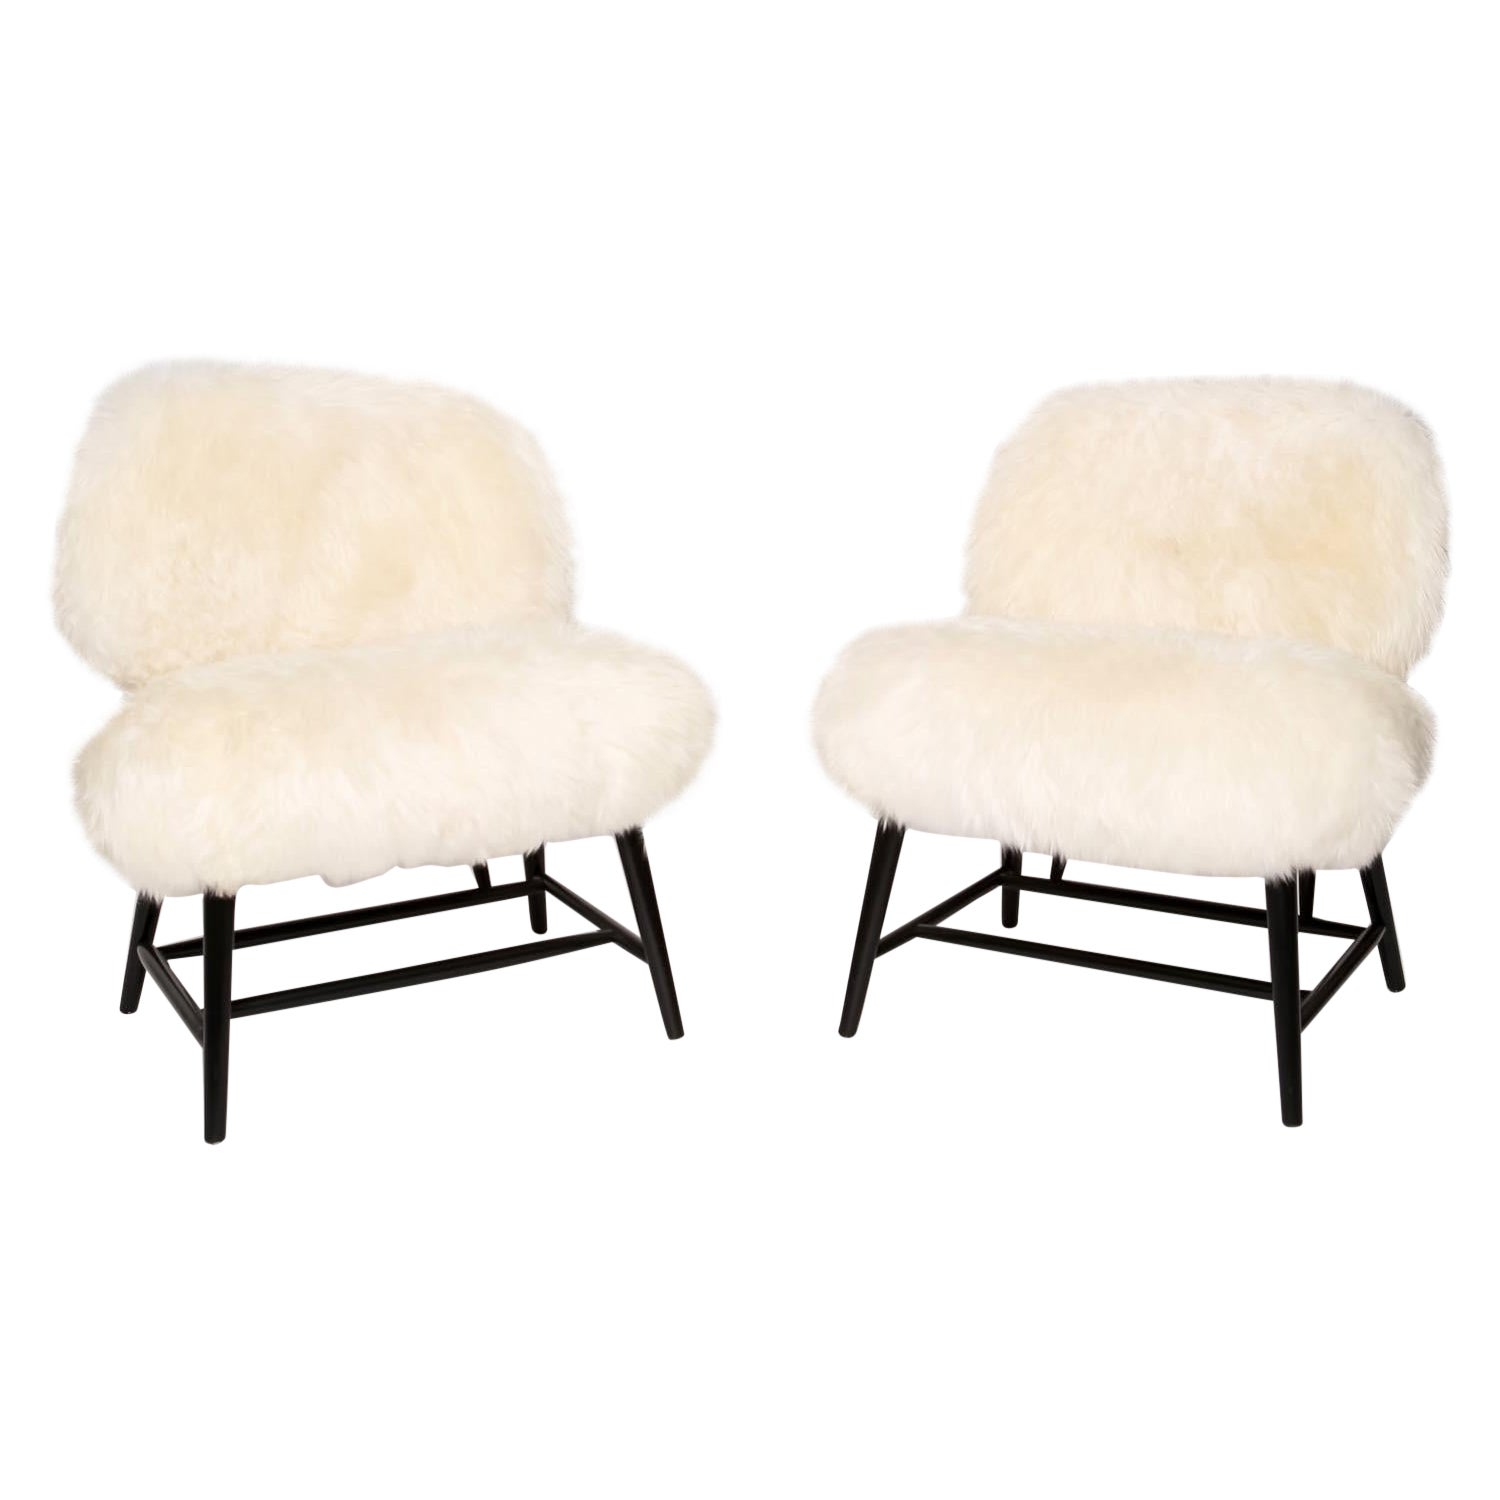 TeVe Chairs, a Pair by Alf Svensson in shearling